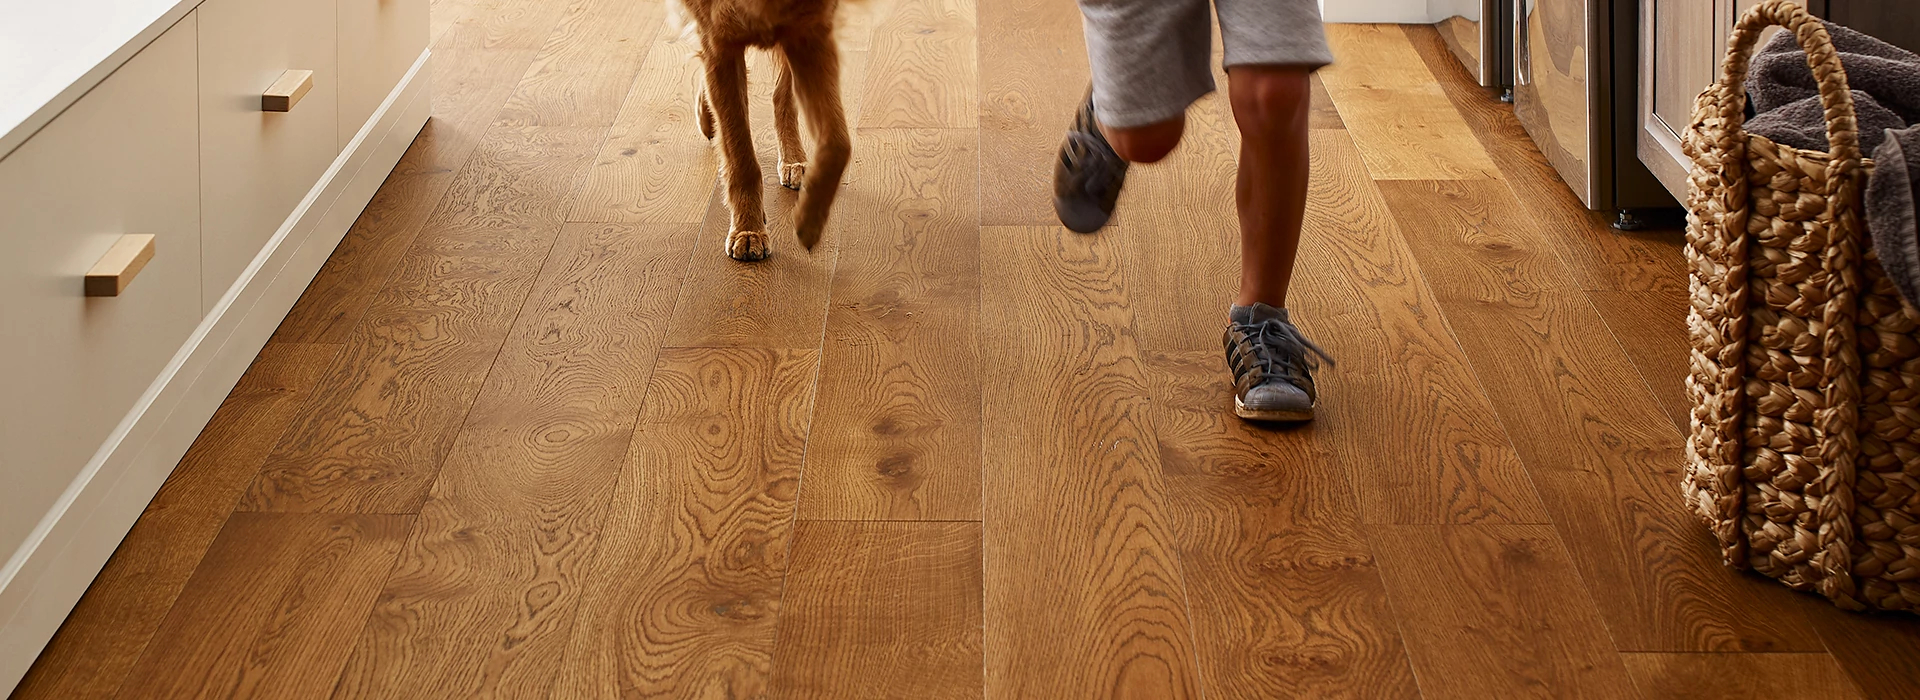 A boy and dog running through a kitchen with a hardwood floor